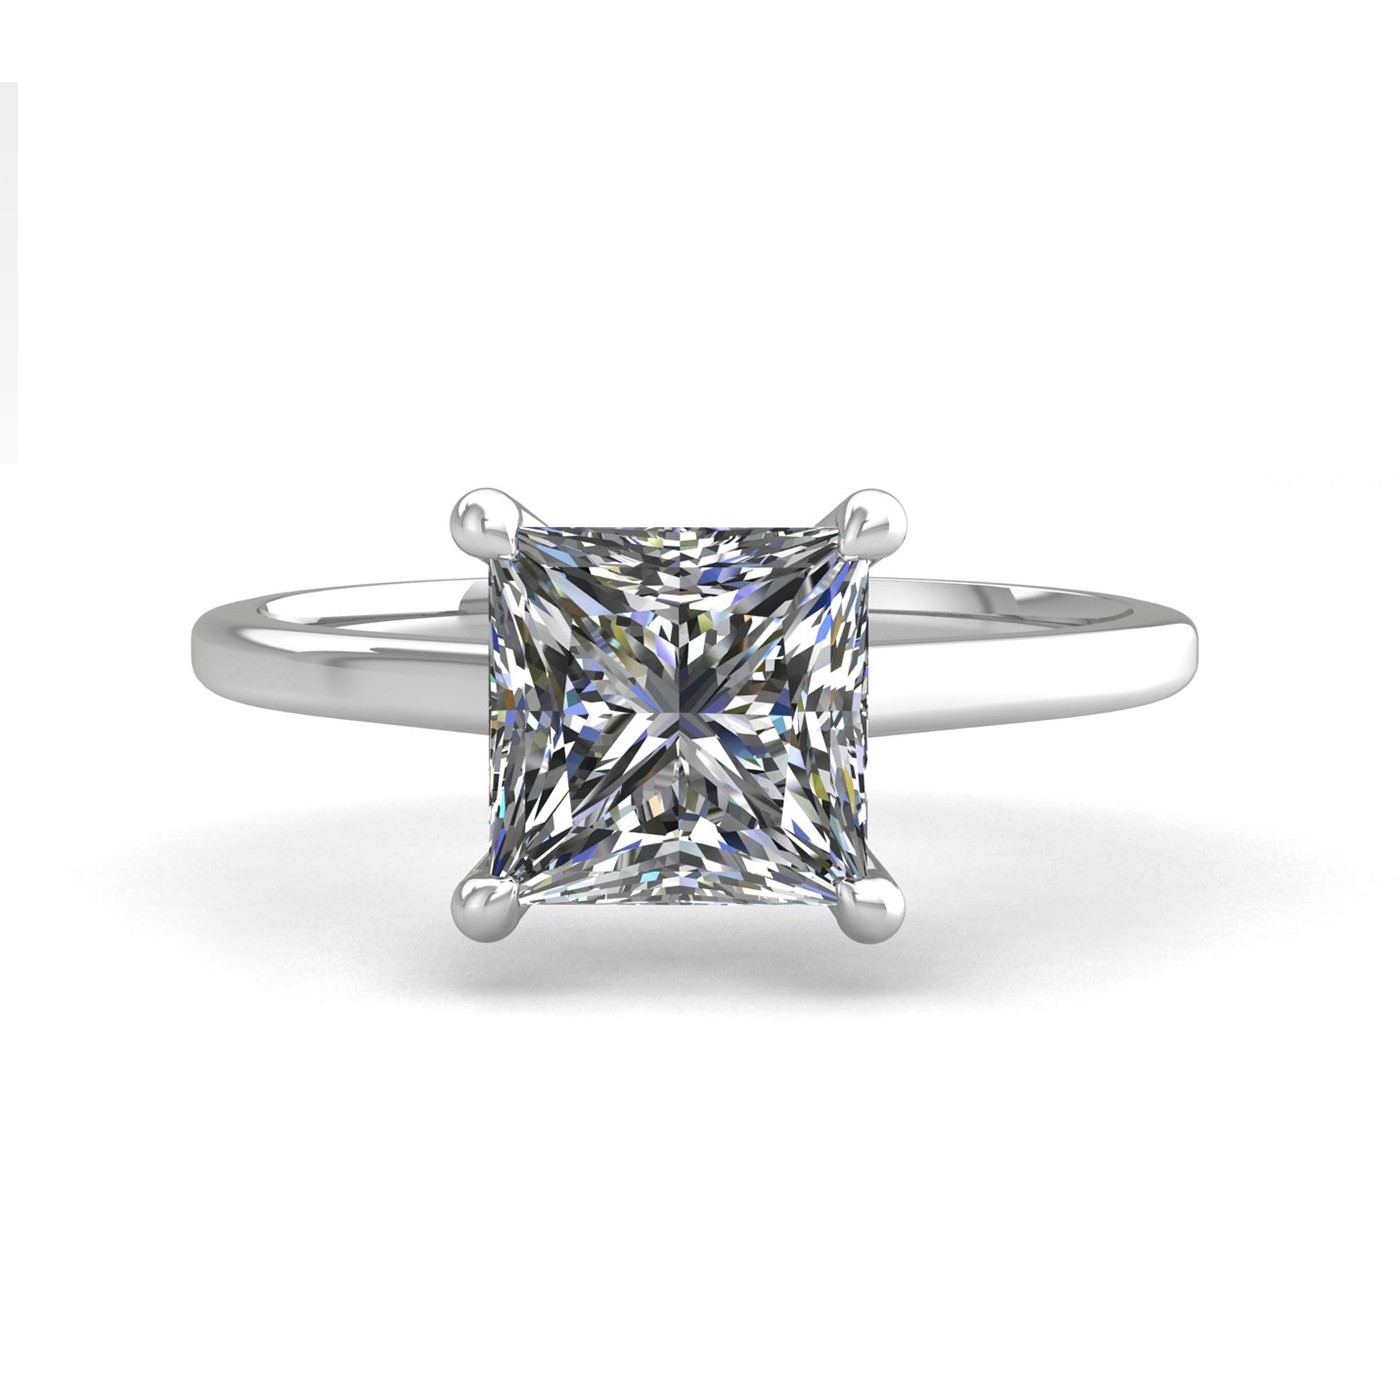 18k white gold  2,50 ct 4 prongs solitaire princess cut diamond engagement ring with whisper thin band Photos & images